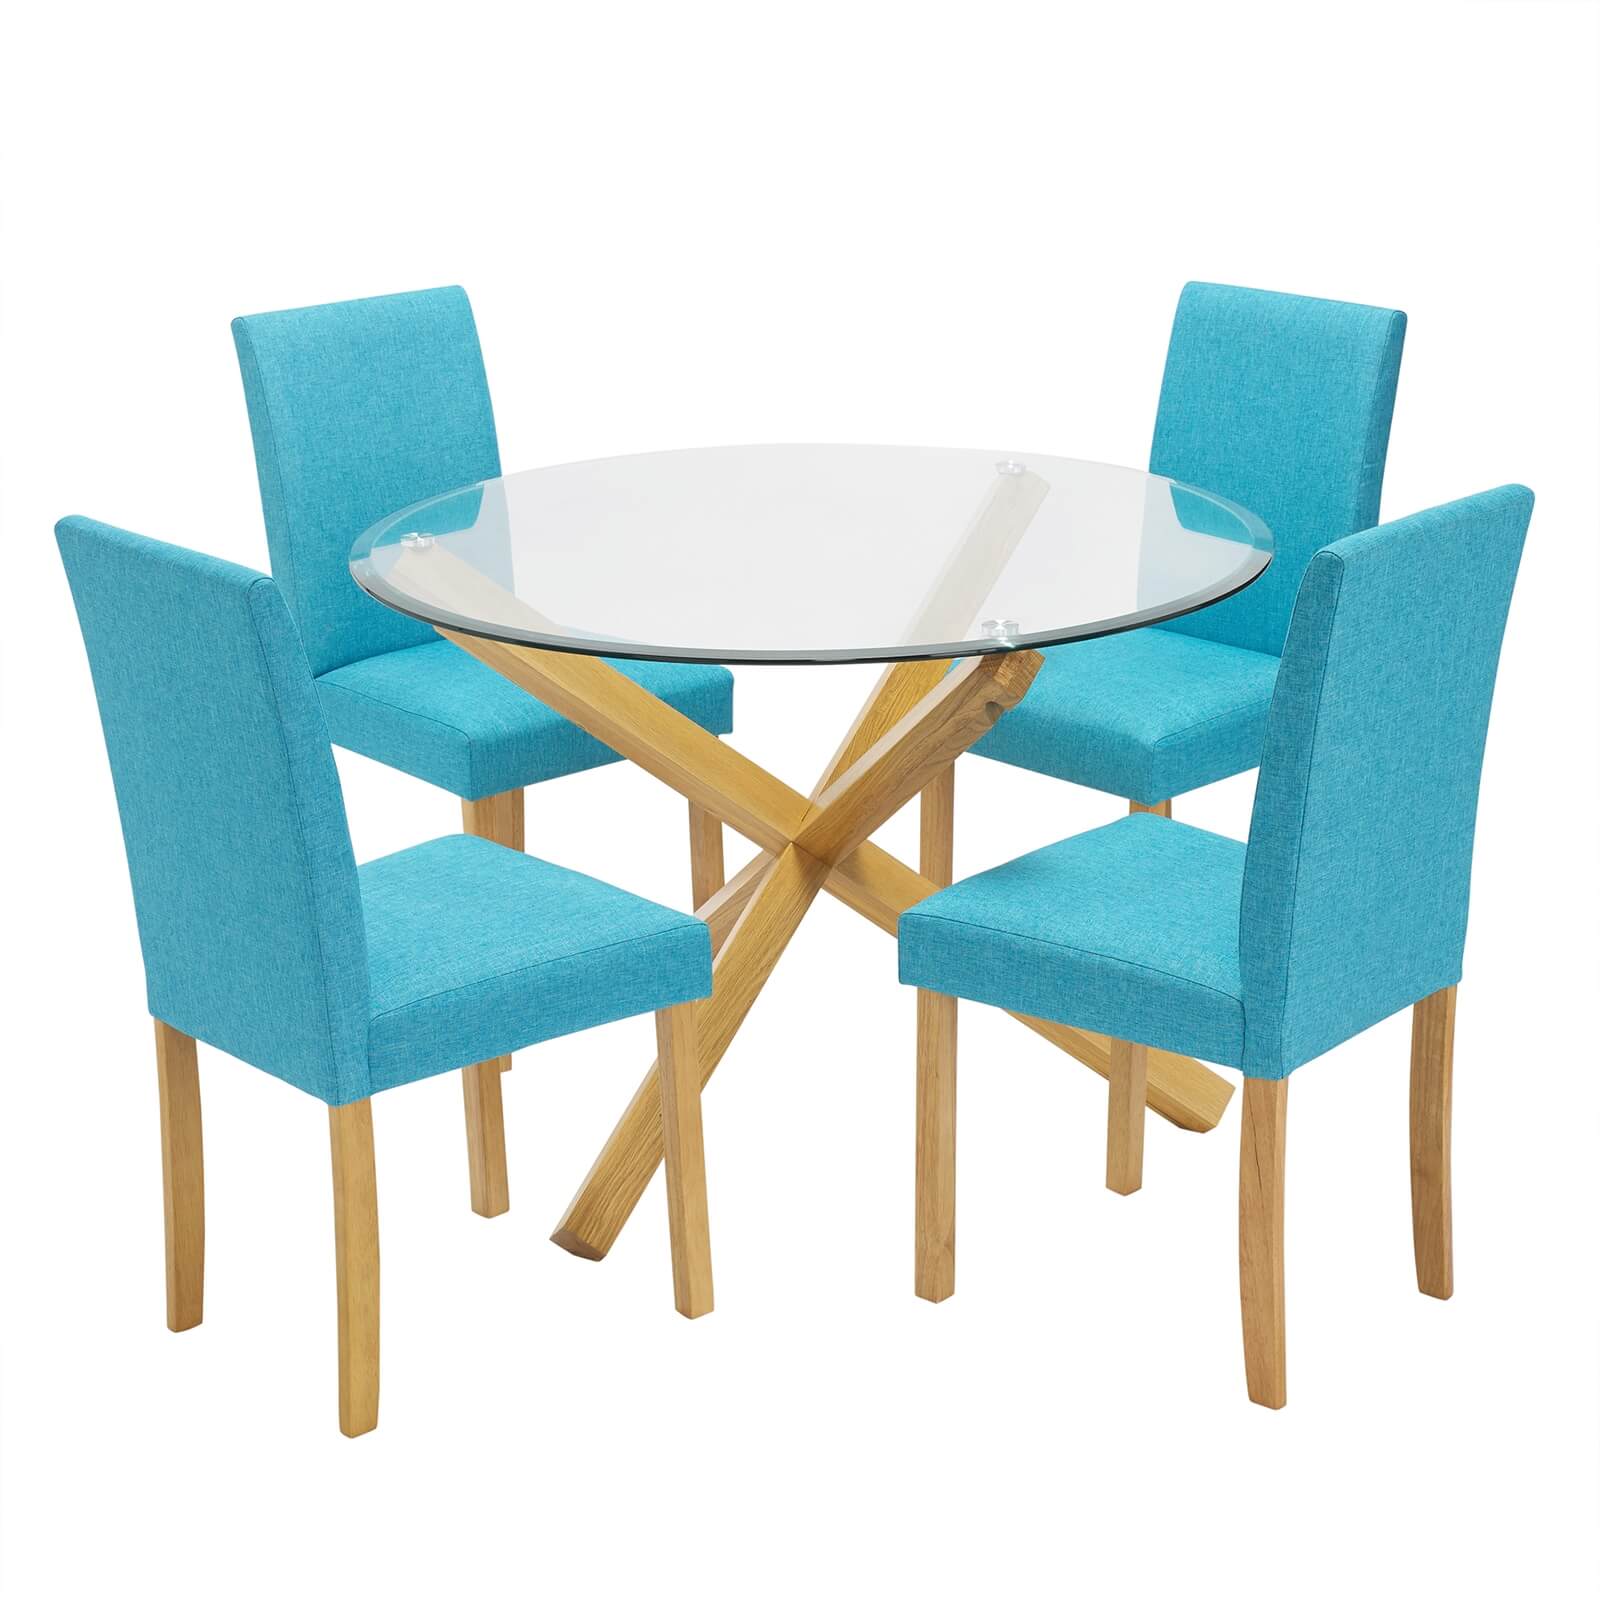 Oporto 4 Seater Dining Set - Anna Dining Chairs - Teal